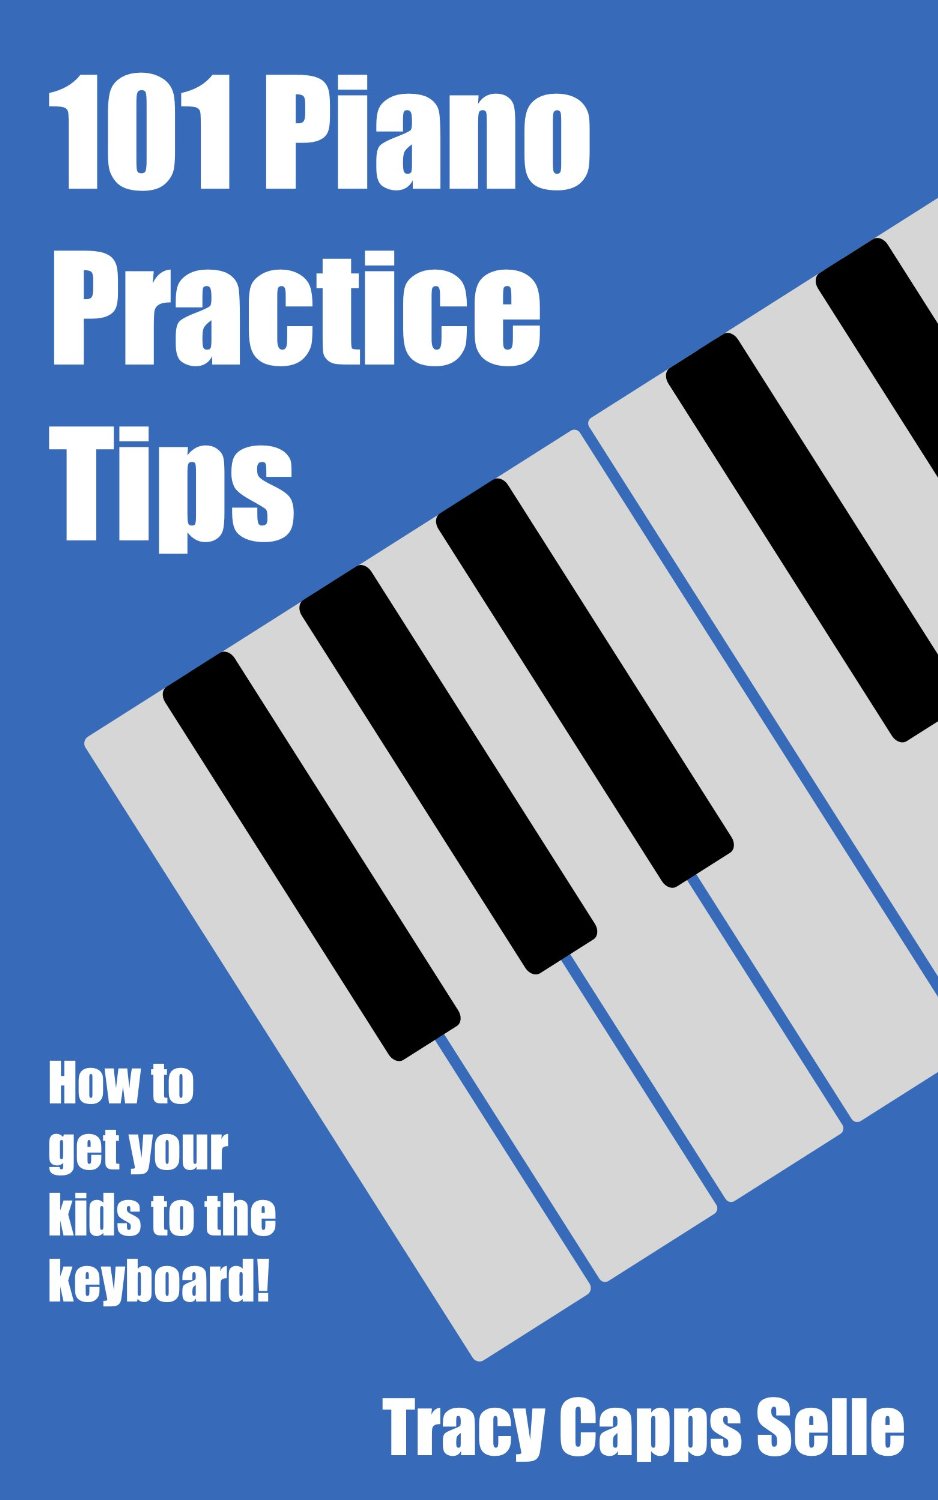 101 Piano Practice Tips by Tracy Capps Selle